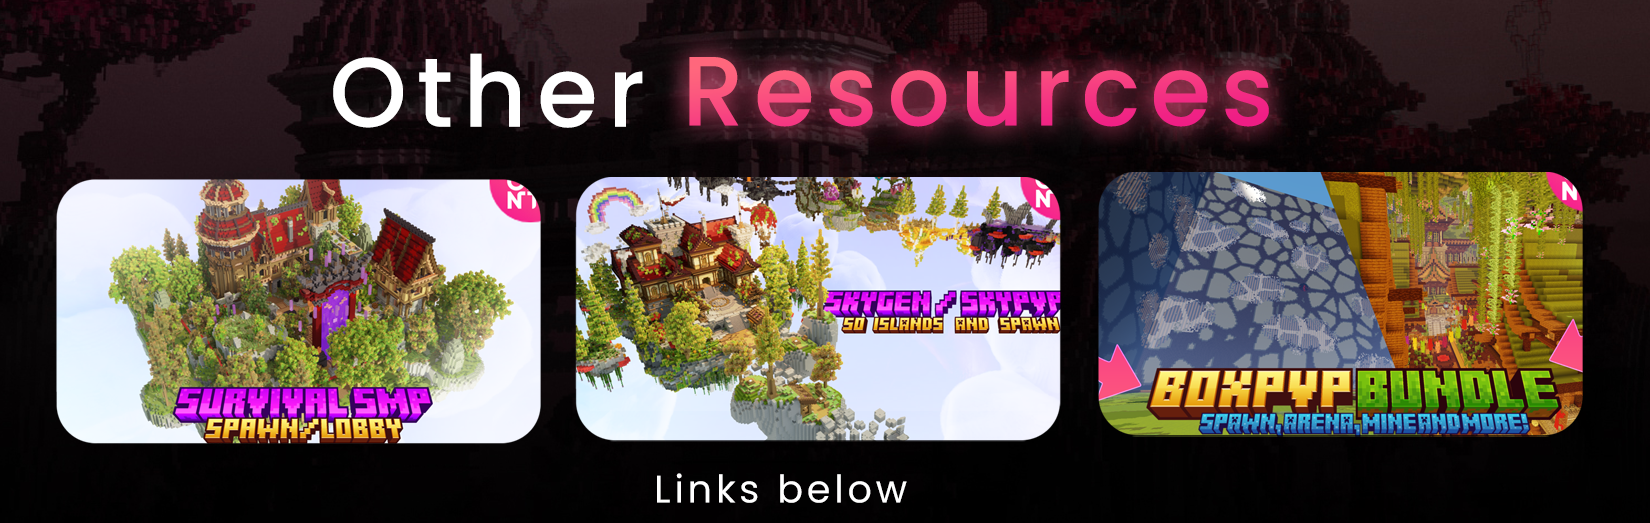 Other Resources.png